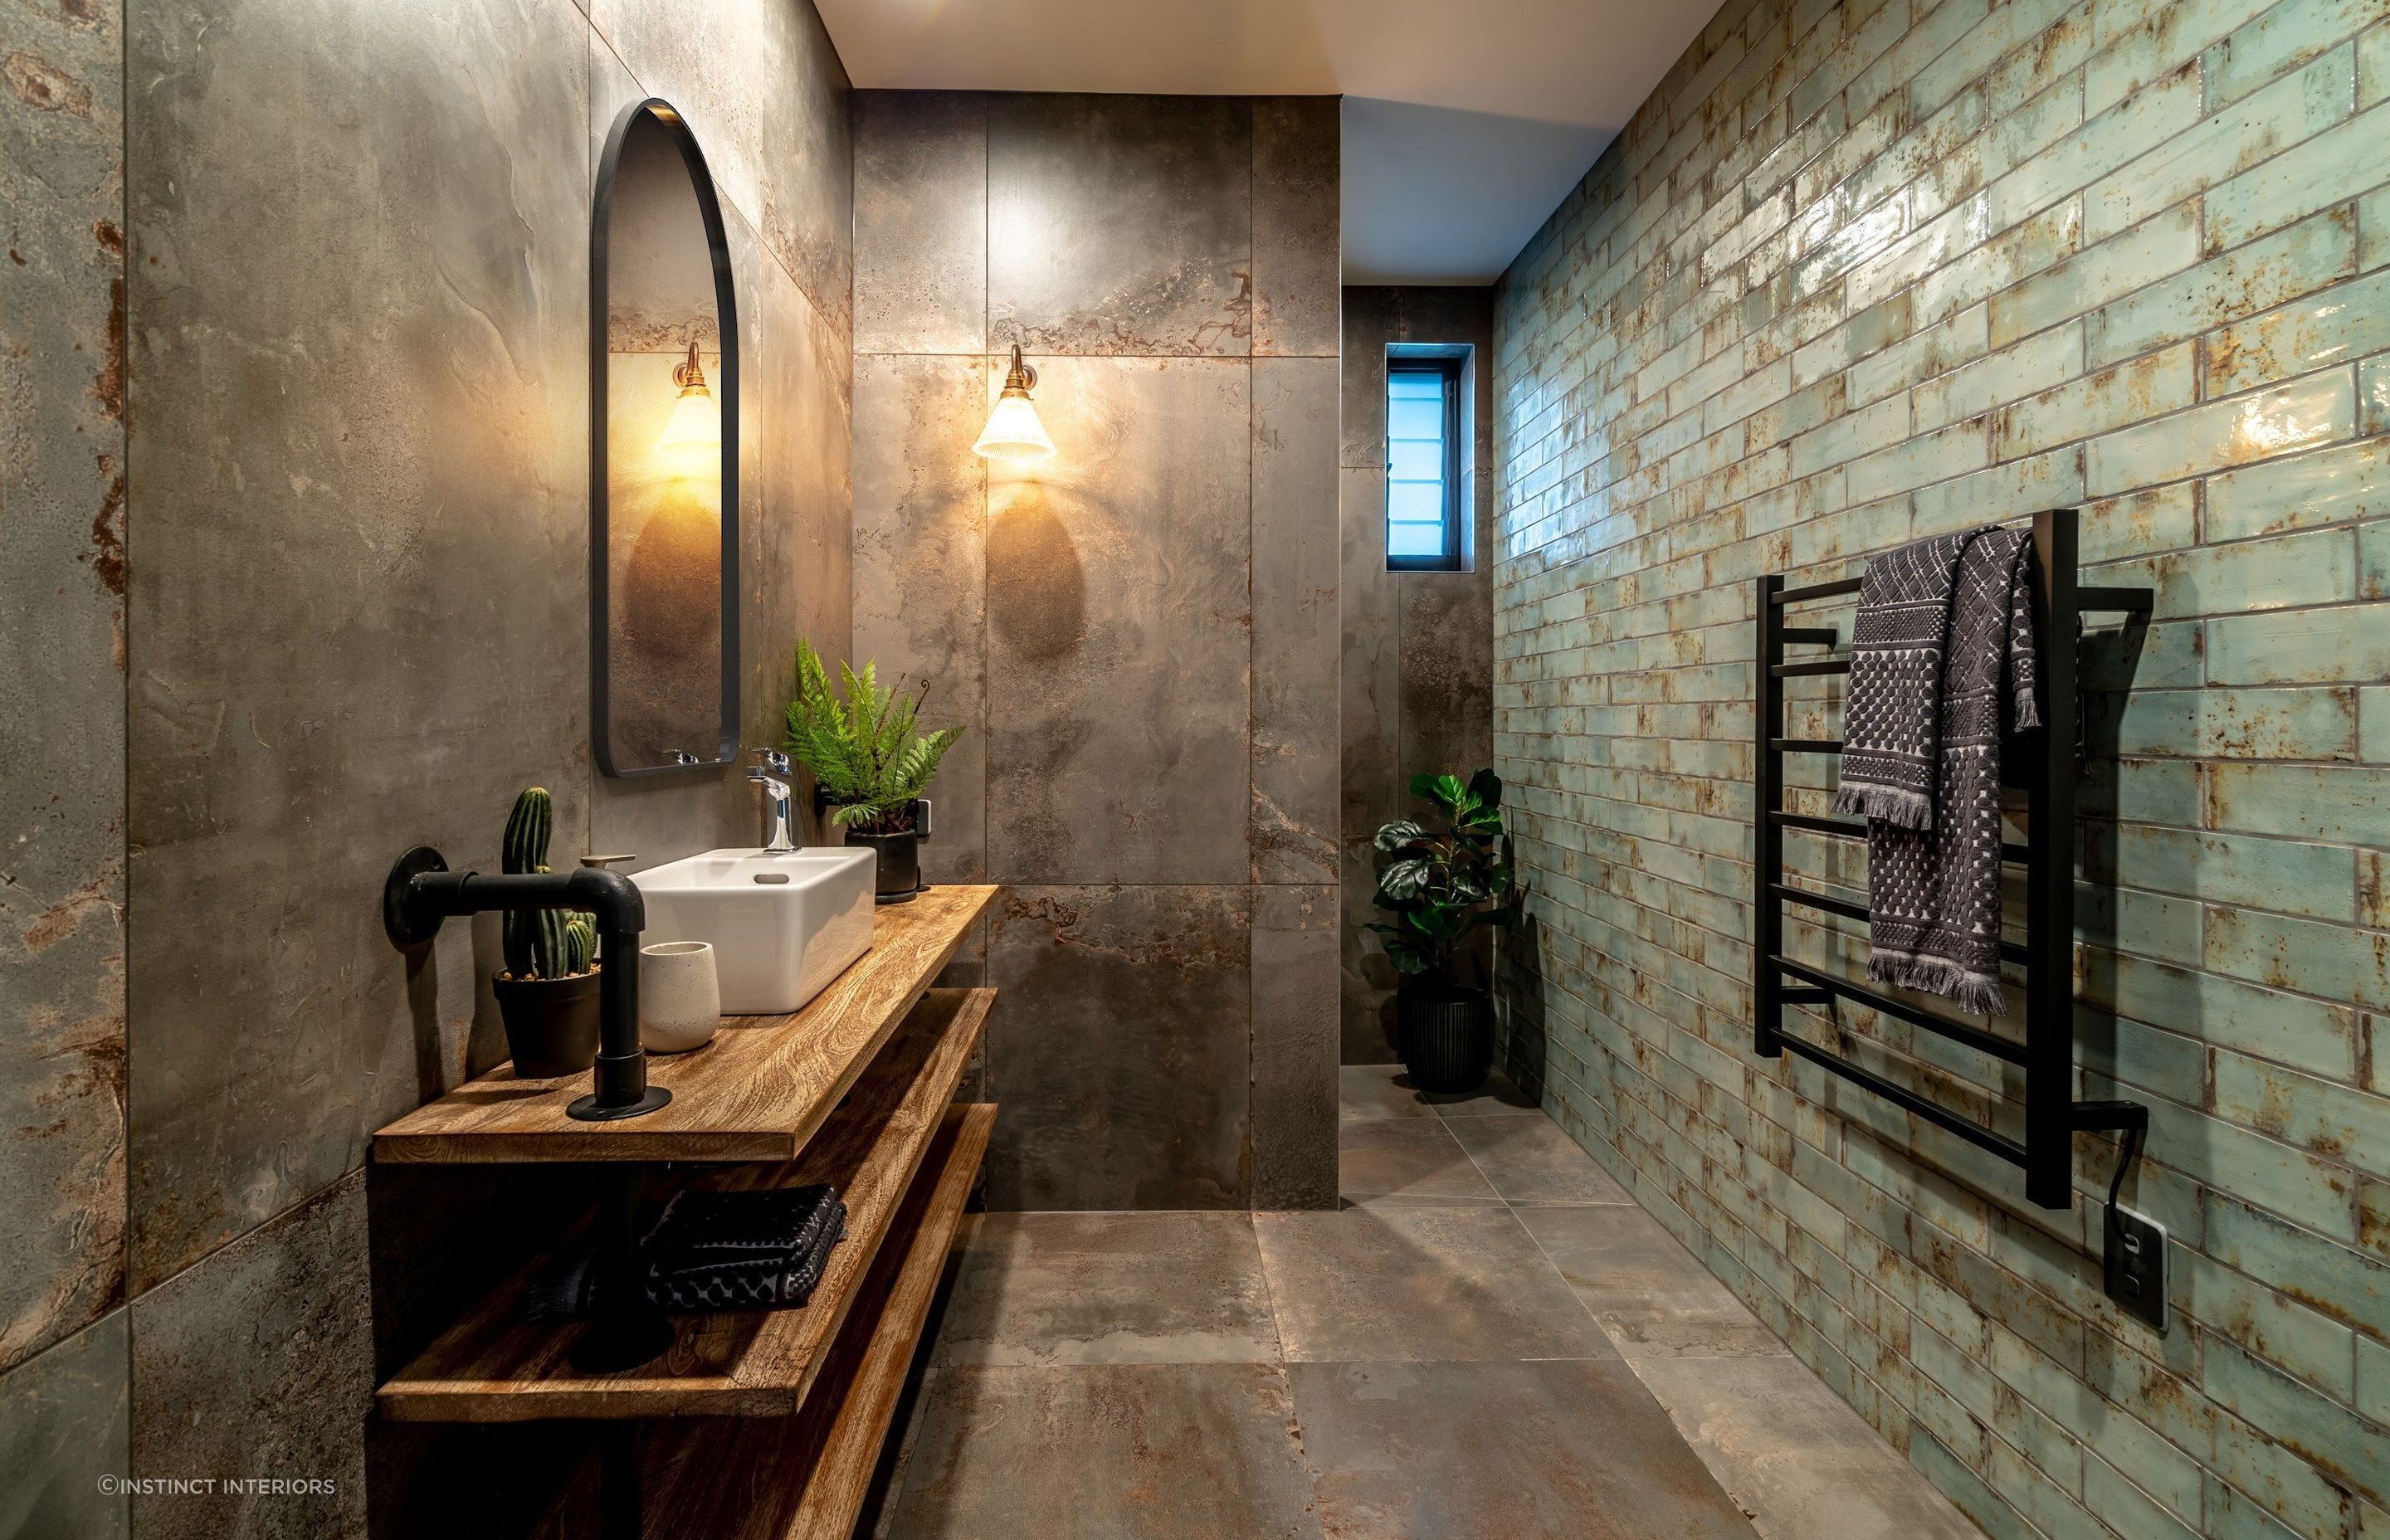 A textural tile quality adds to the industrial style of this bathroom in Alexandra.